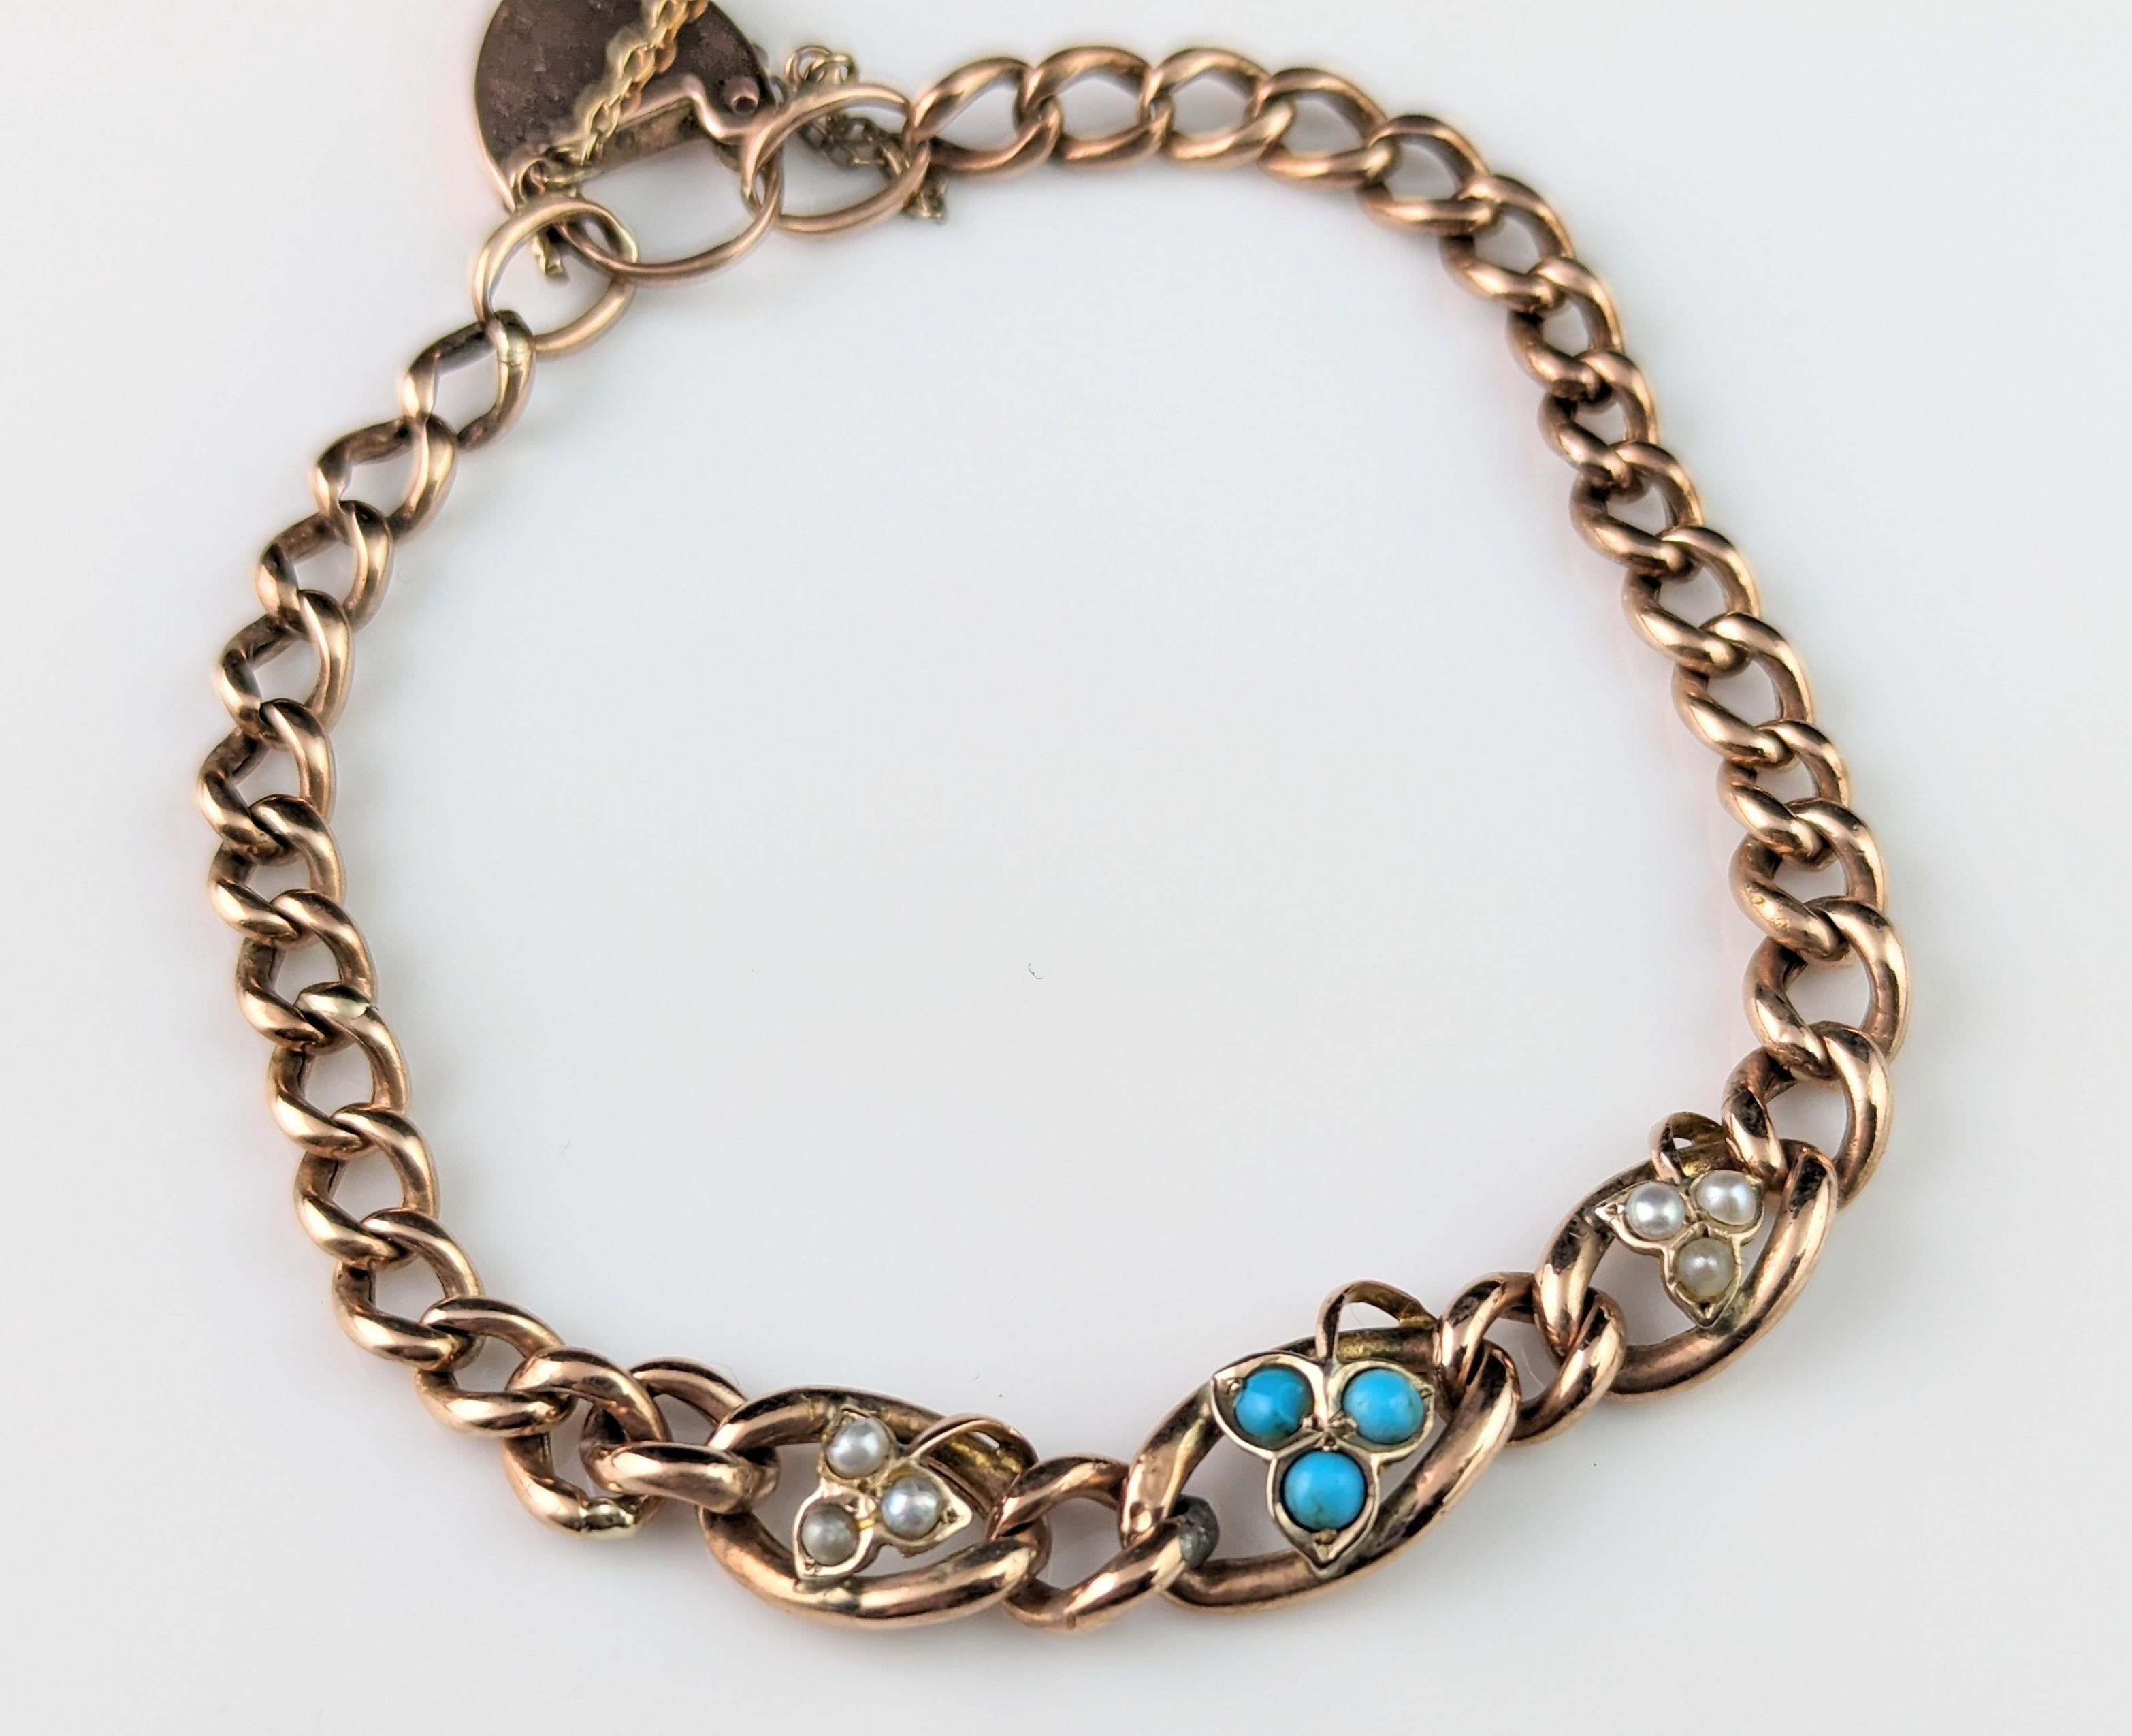 Antique 9k gold curb bracelet, Turquoise and Pearl leaves, Edwardian  For Sale 7